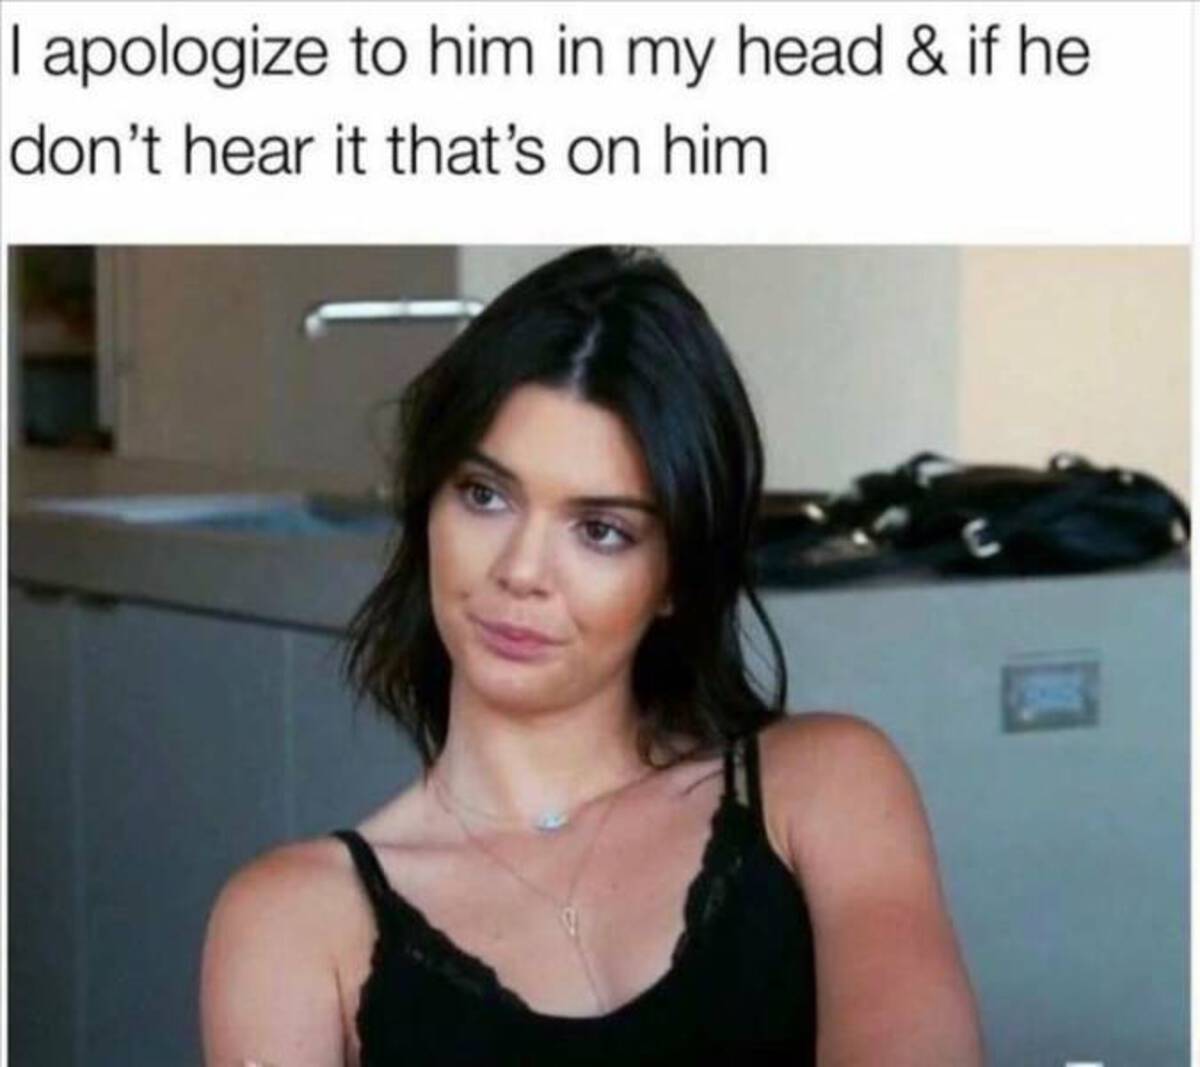 apologize to him in my head meme - I apologize to him in my head & if he don't hear it that's on him